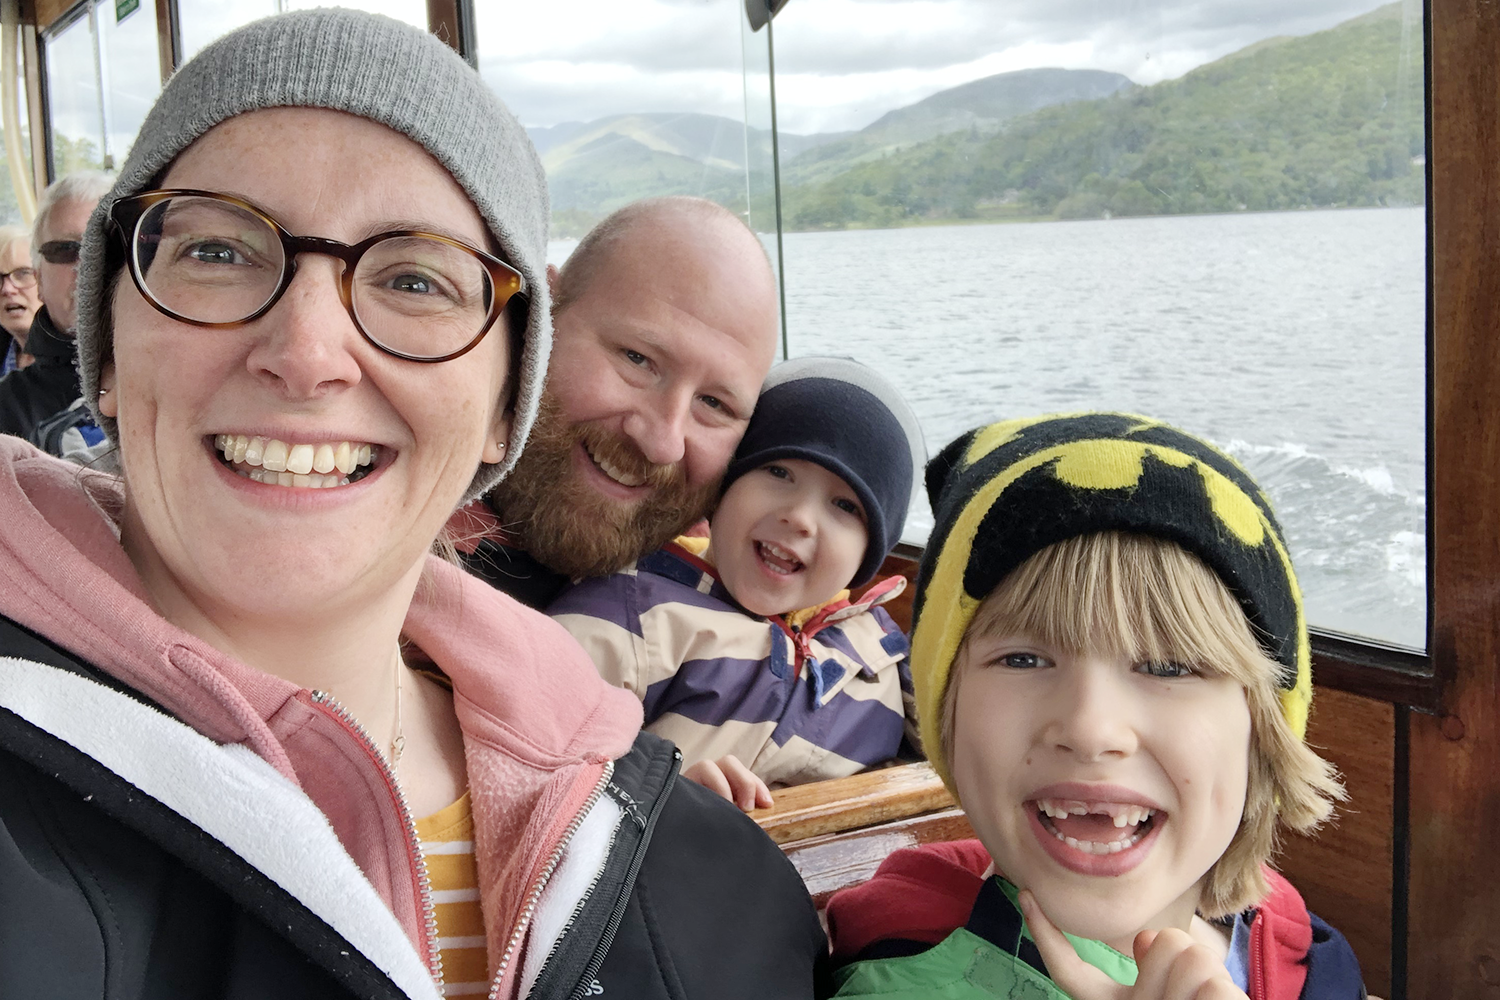 On the boat across Windermere